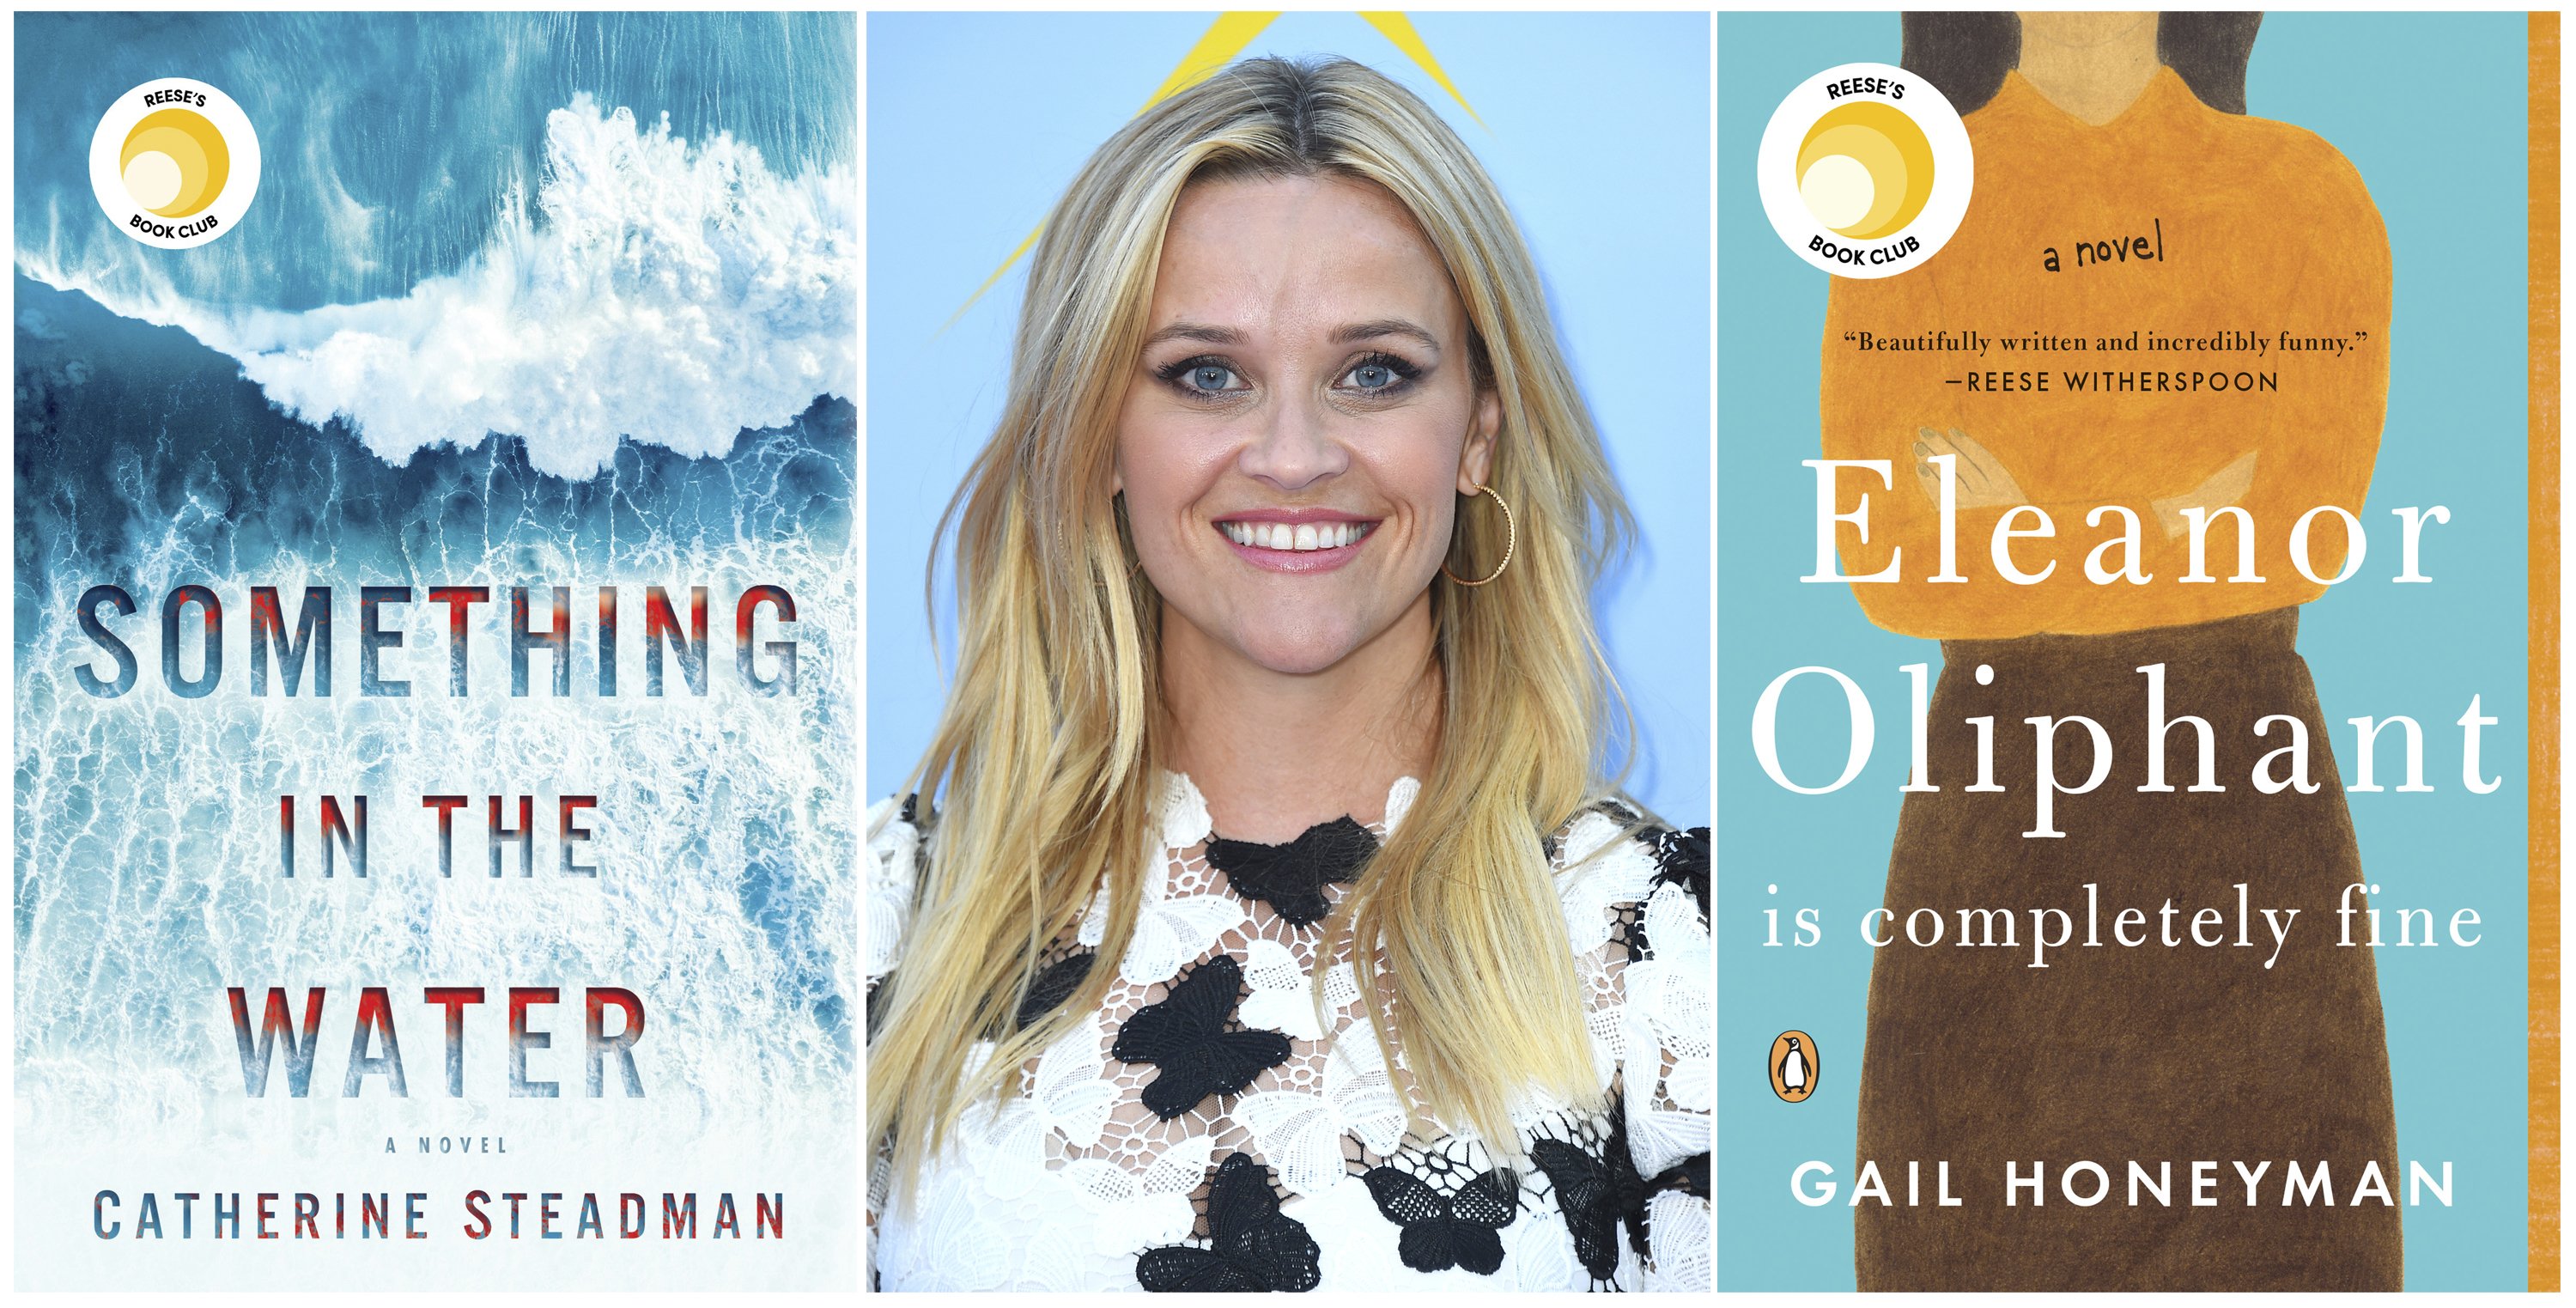 From Reese Witherspoon to SJP, the rise of celeb book clubs | AP News